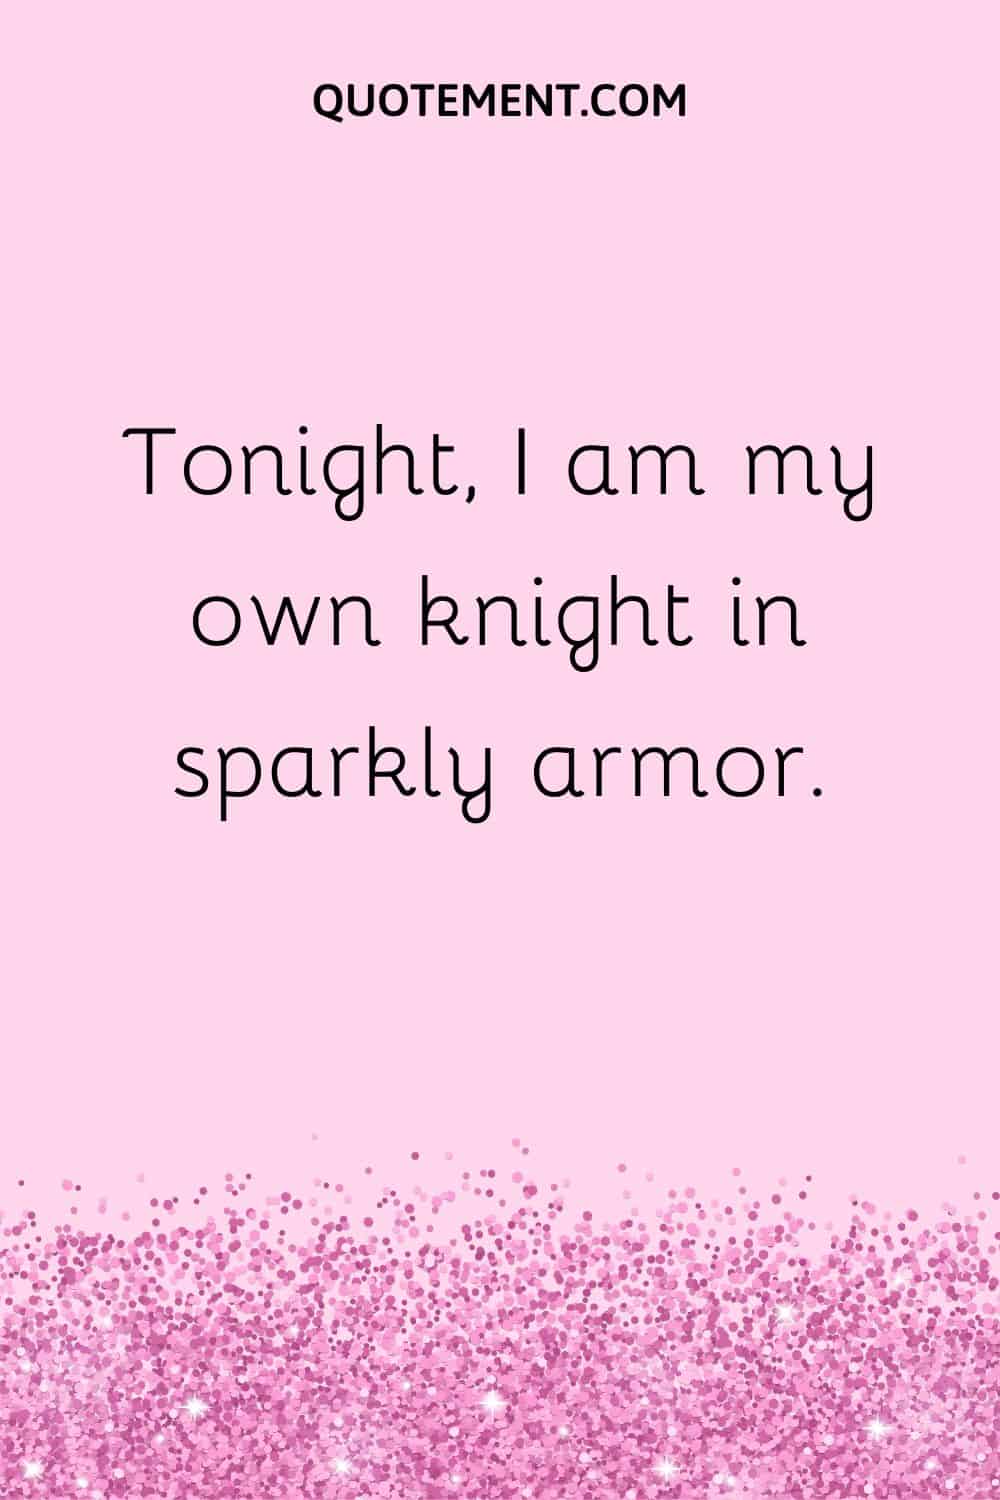 I am my own knight in sparkly armor